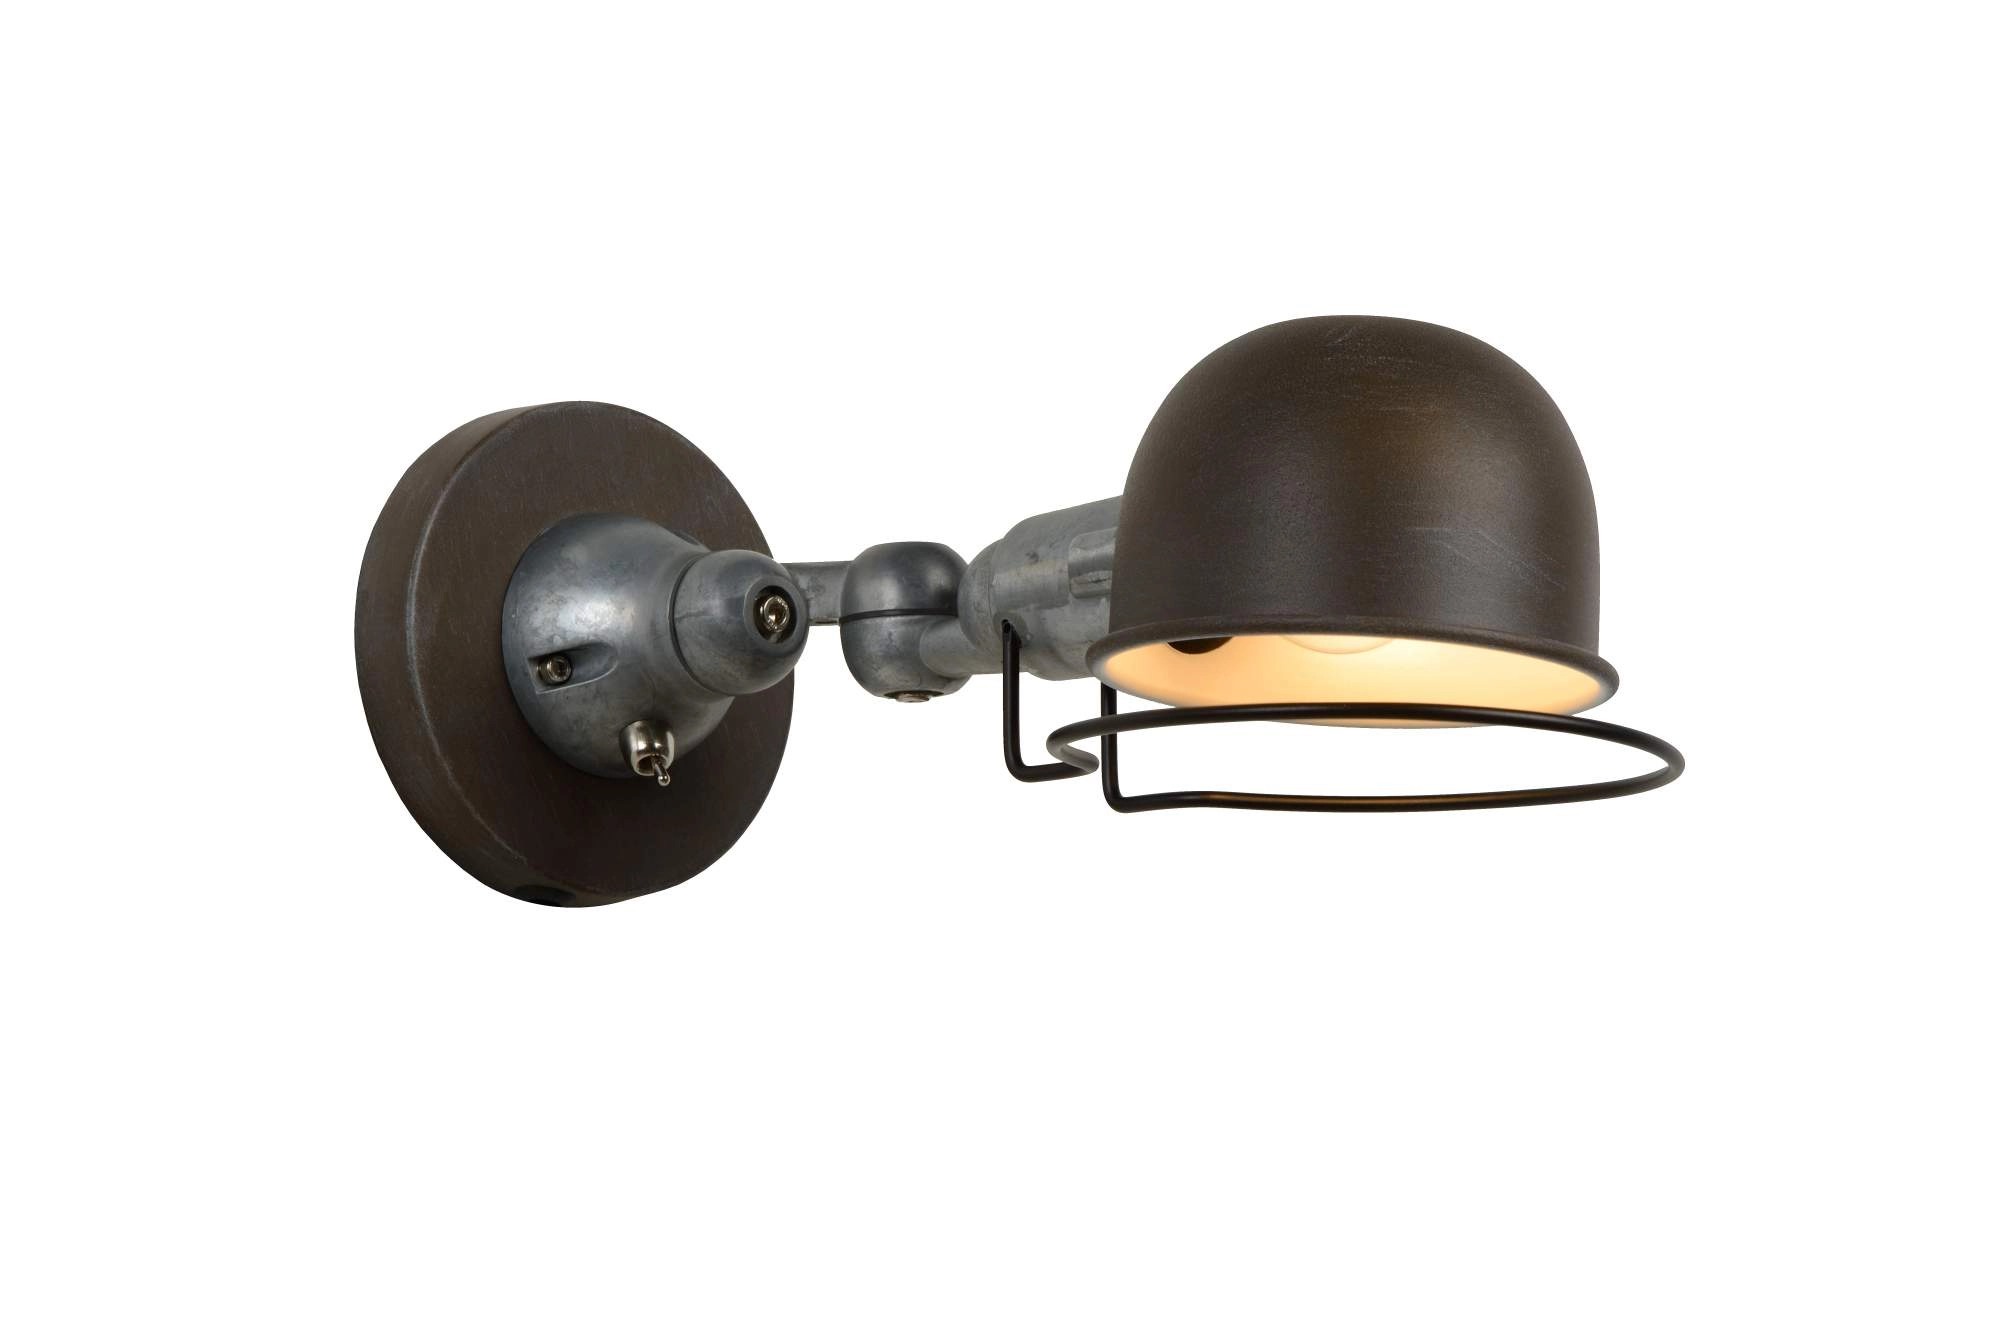 LU 45252/01/97 Lucide HONORE - Wall light - 1xE14 - Rust Brown